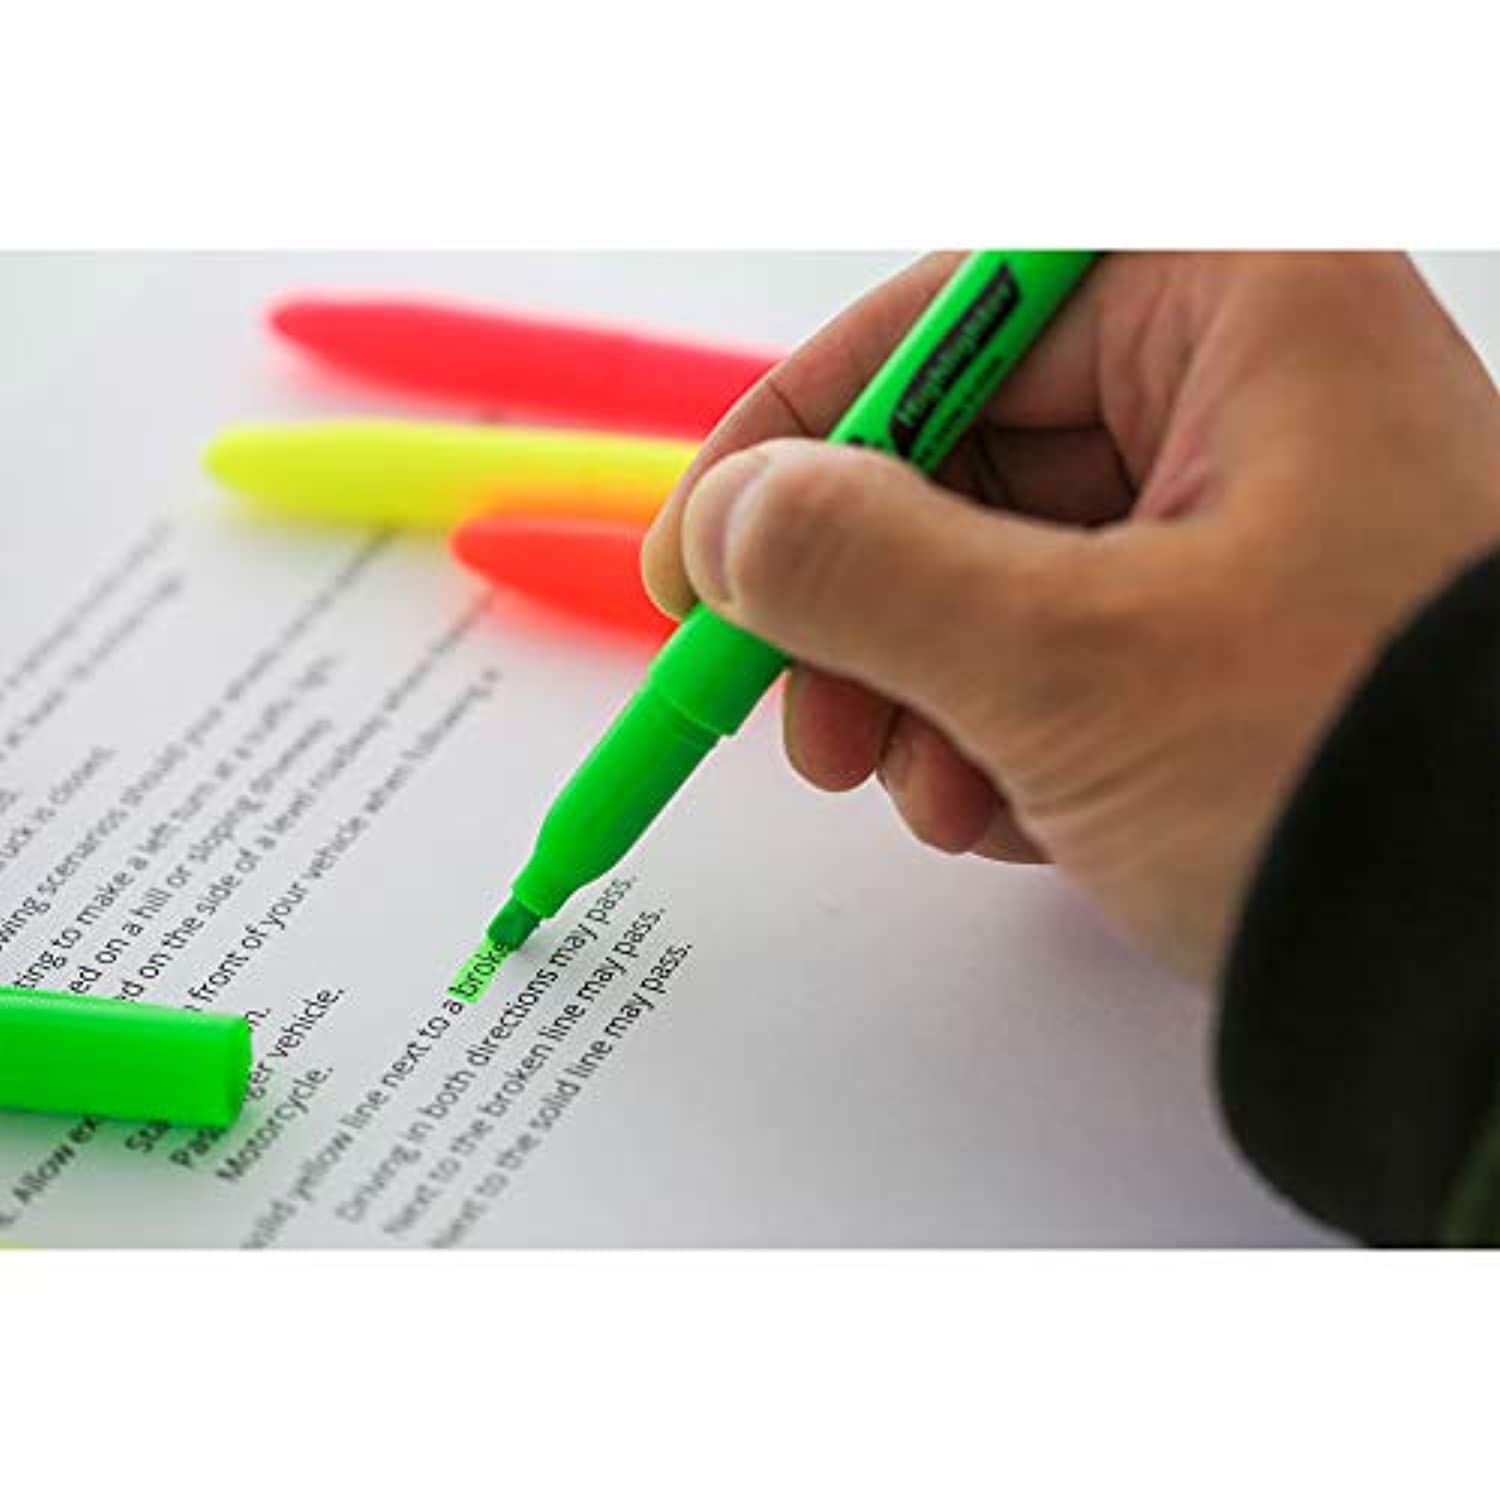 Yellow Color Pen Style Fluorescent Highlighter w/Pocket Clip, Unscented Quick Dry (5/Pack)